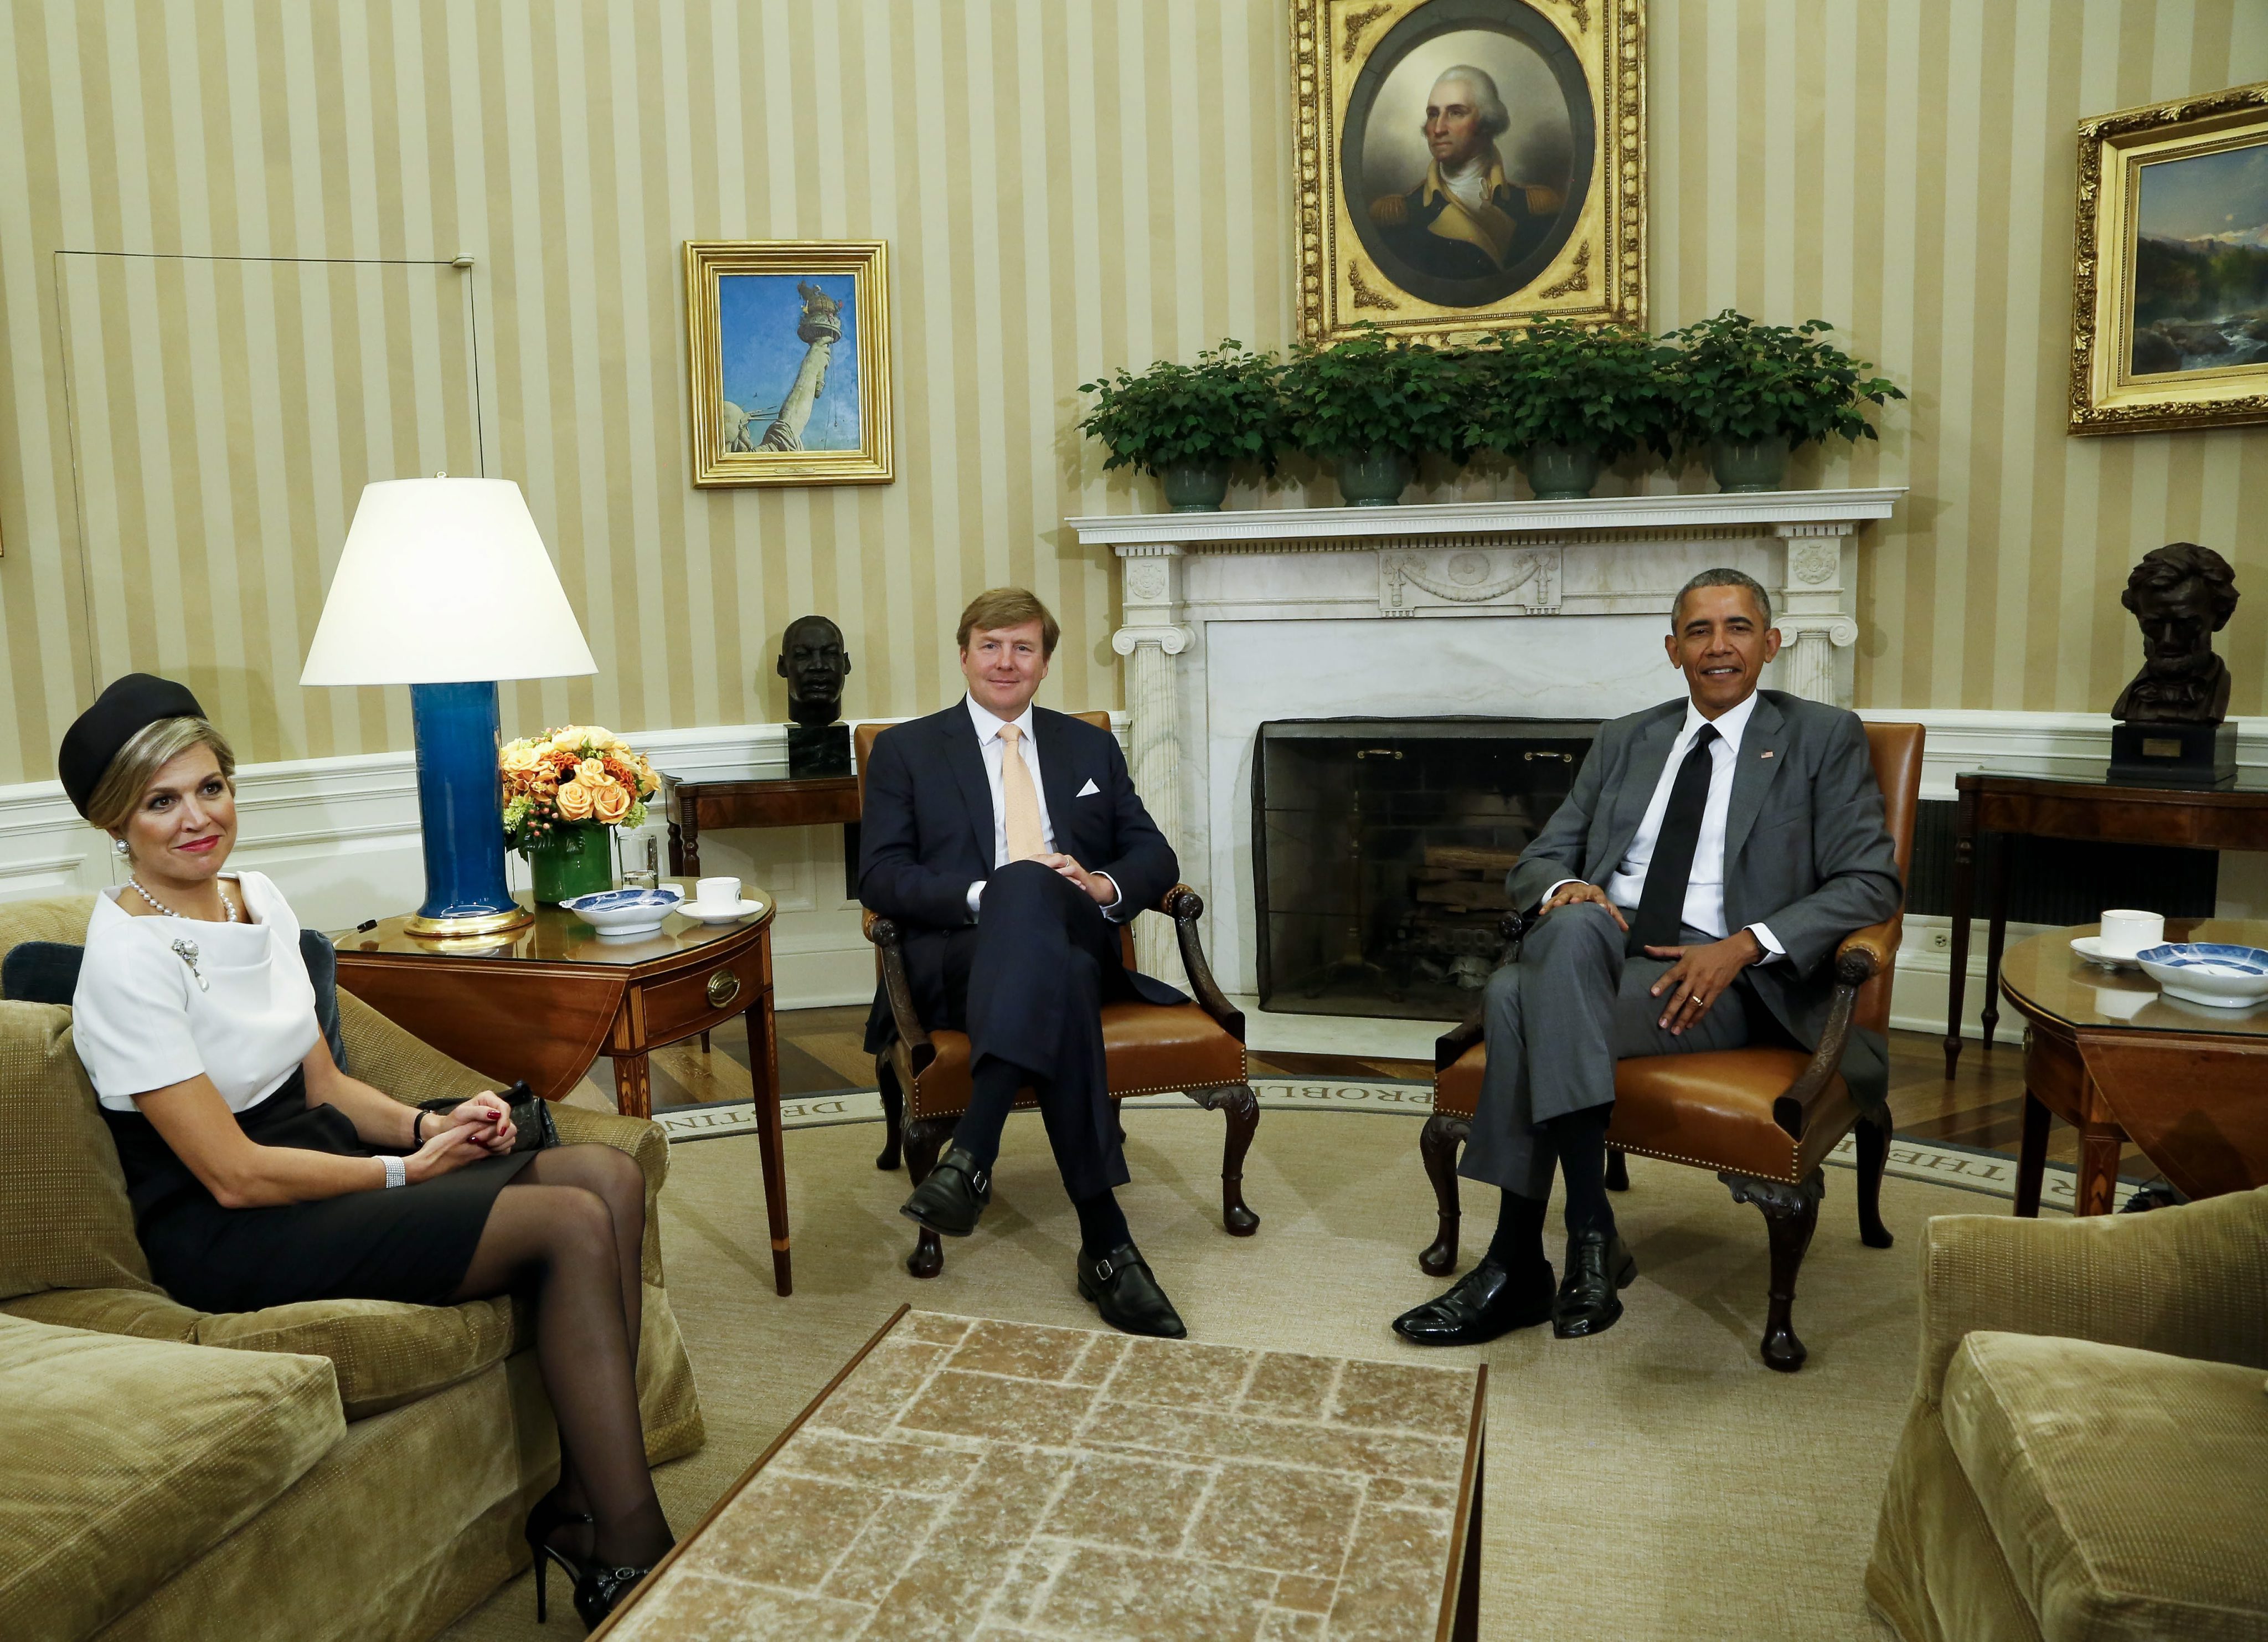 2015-06-01 10:40:57 epa04779092 US President Barack Obama meets with the King, Willem-Alexander (C) and the Queen Maxima (L) of the Netherlands for a meeting in the Oval Office of the White House, in Washington, DC, USA, on 01 June 2015. EPA/AUDE GUERRUCCI / POOL